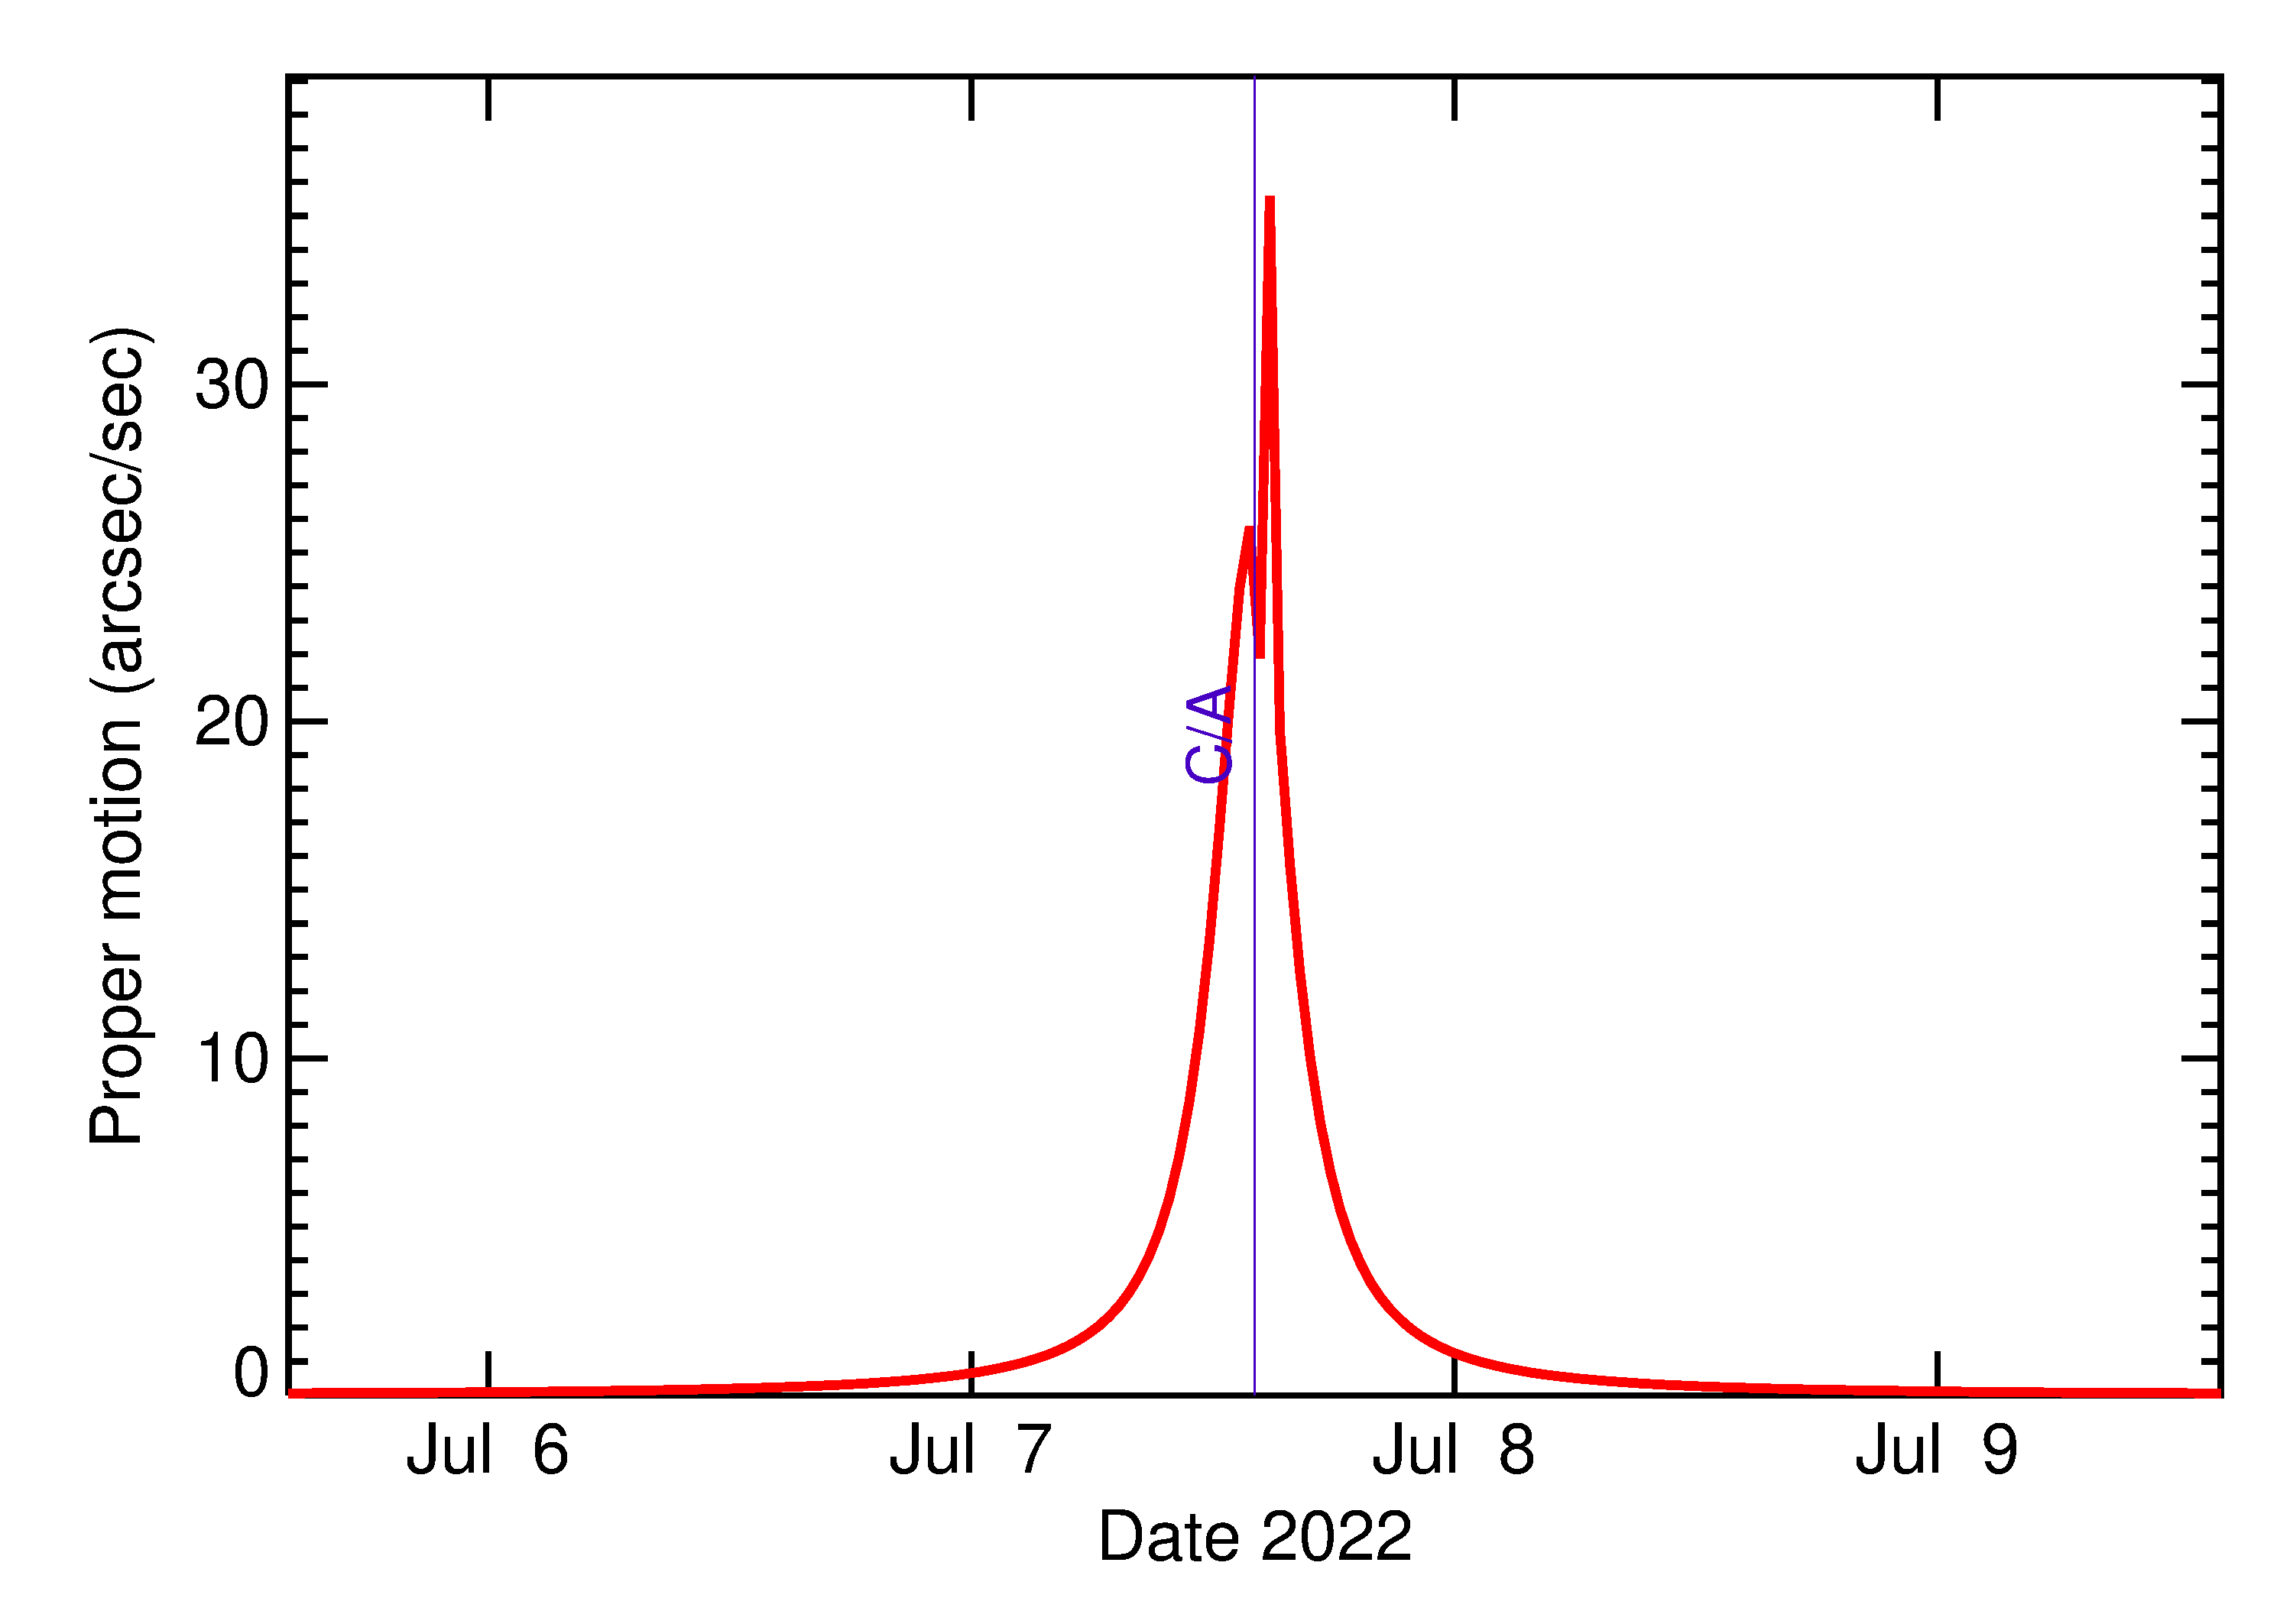 Proper motion rate of 2022 NF in the days around closest approach